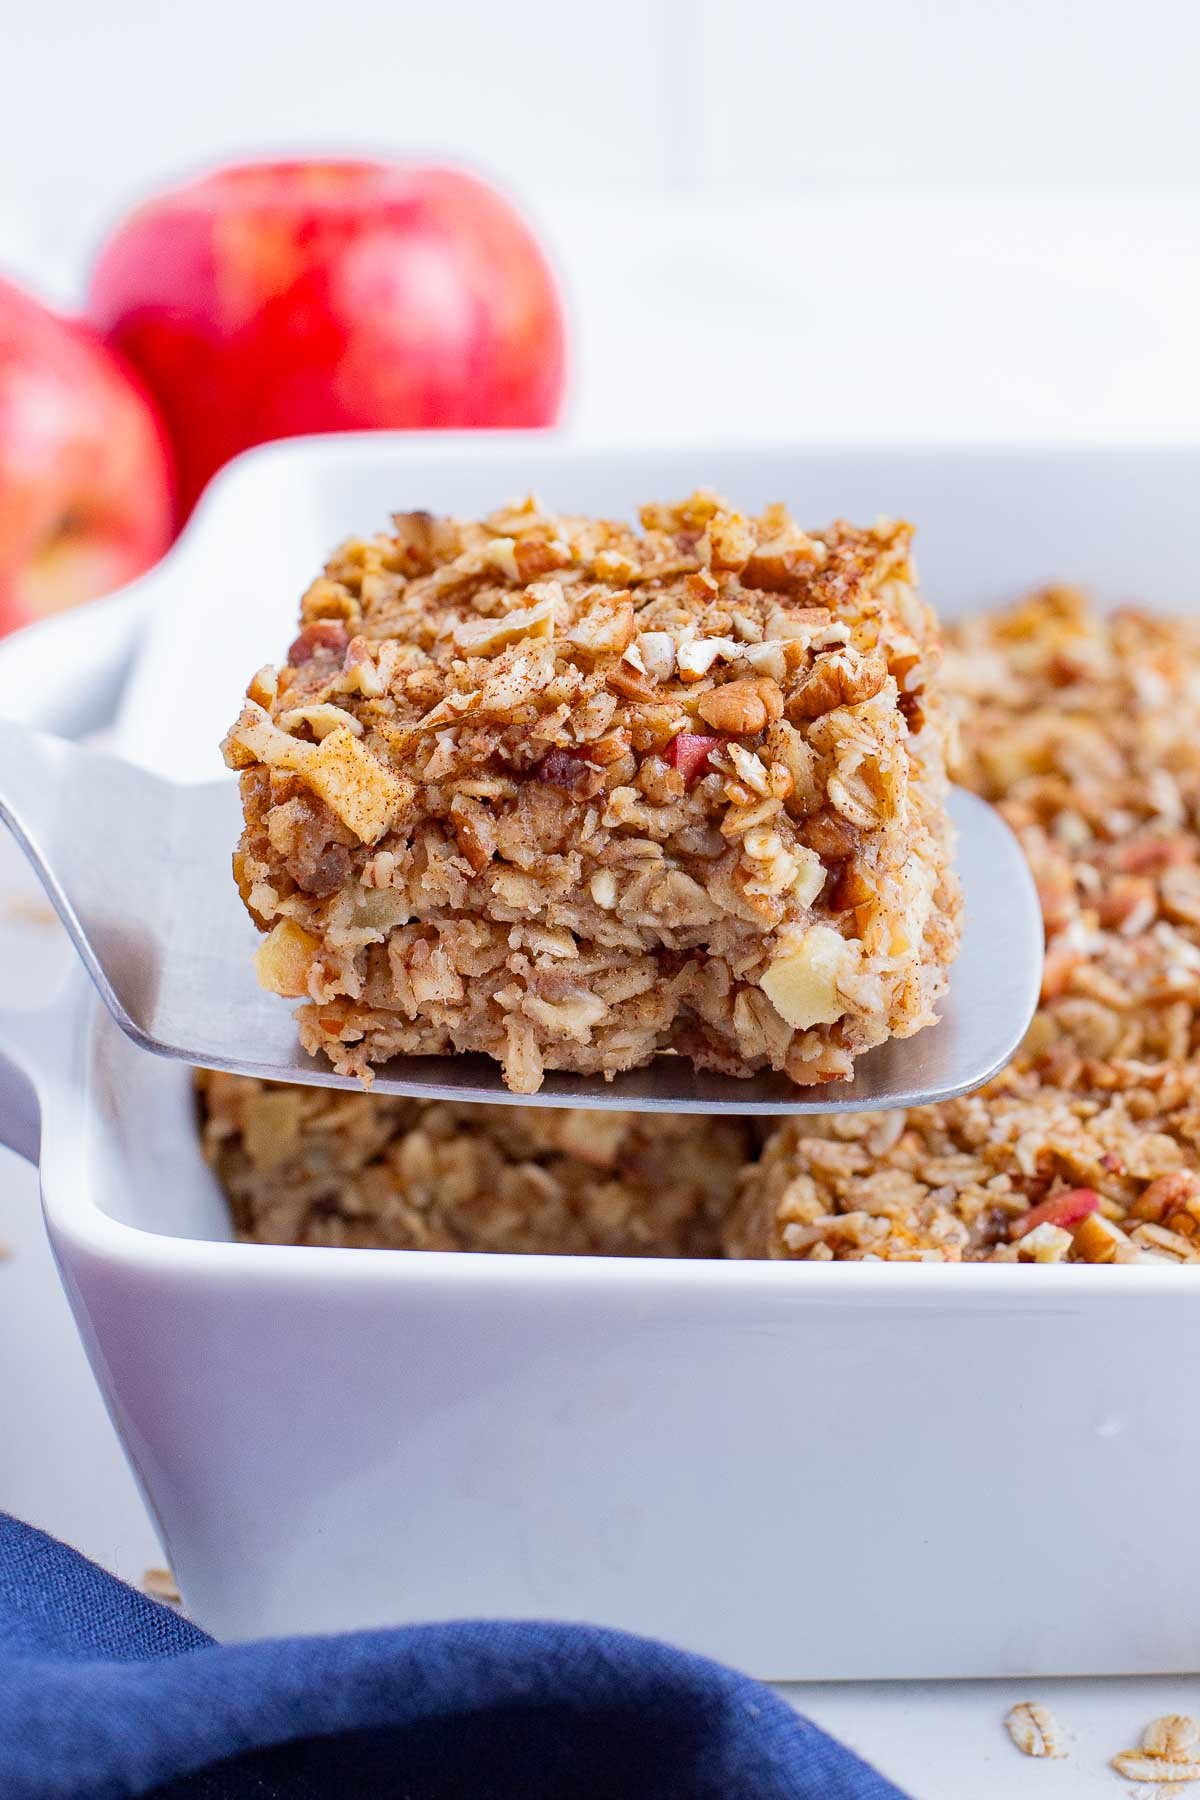 Baked apple oatmeal is a healthy and filling breakfast you can make ahead of time.